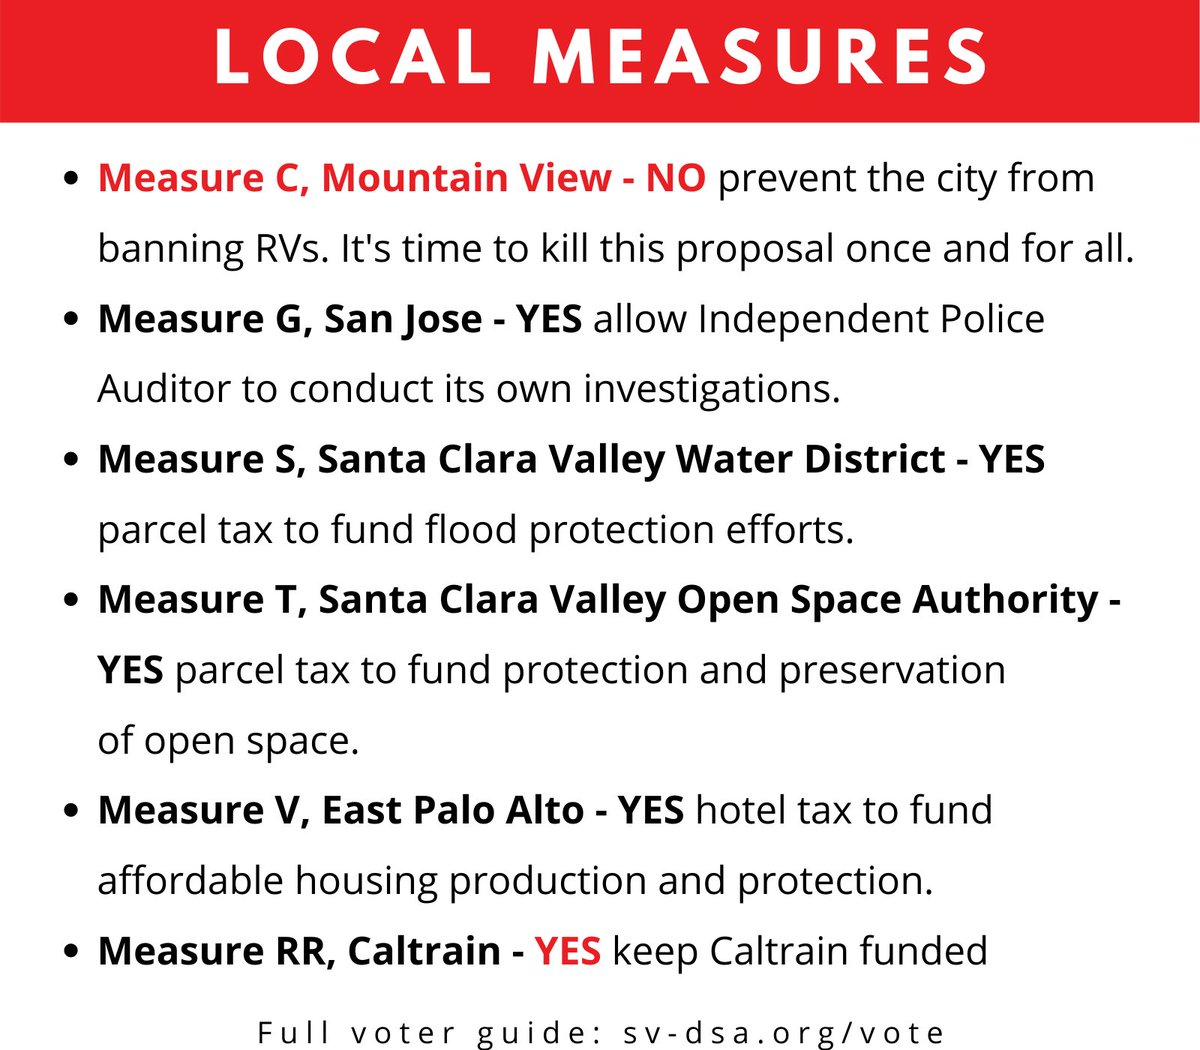 We are endorsing state and local ballot measures: YES on Prop 15. Tax corporate property! YES on Prop 21. Let cities expand rent control! NO on Measure C, Mtn View - Stop the RV Ban! YES on Measure RR - Save Caltrain!